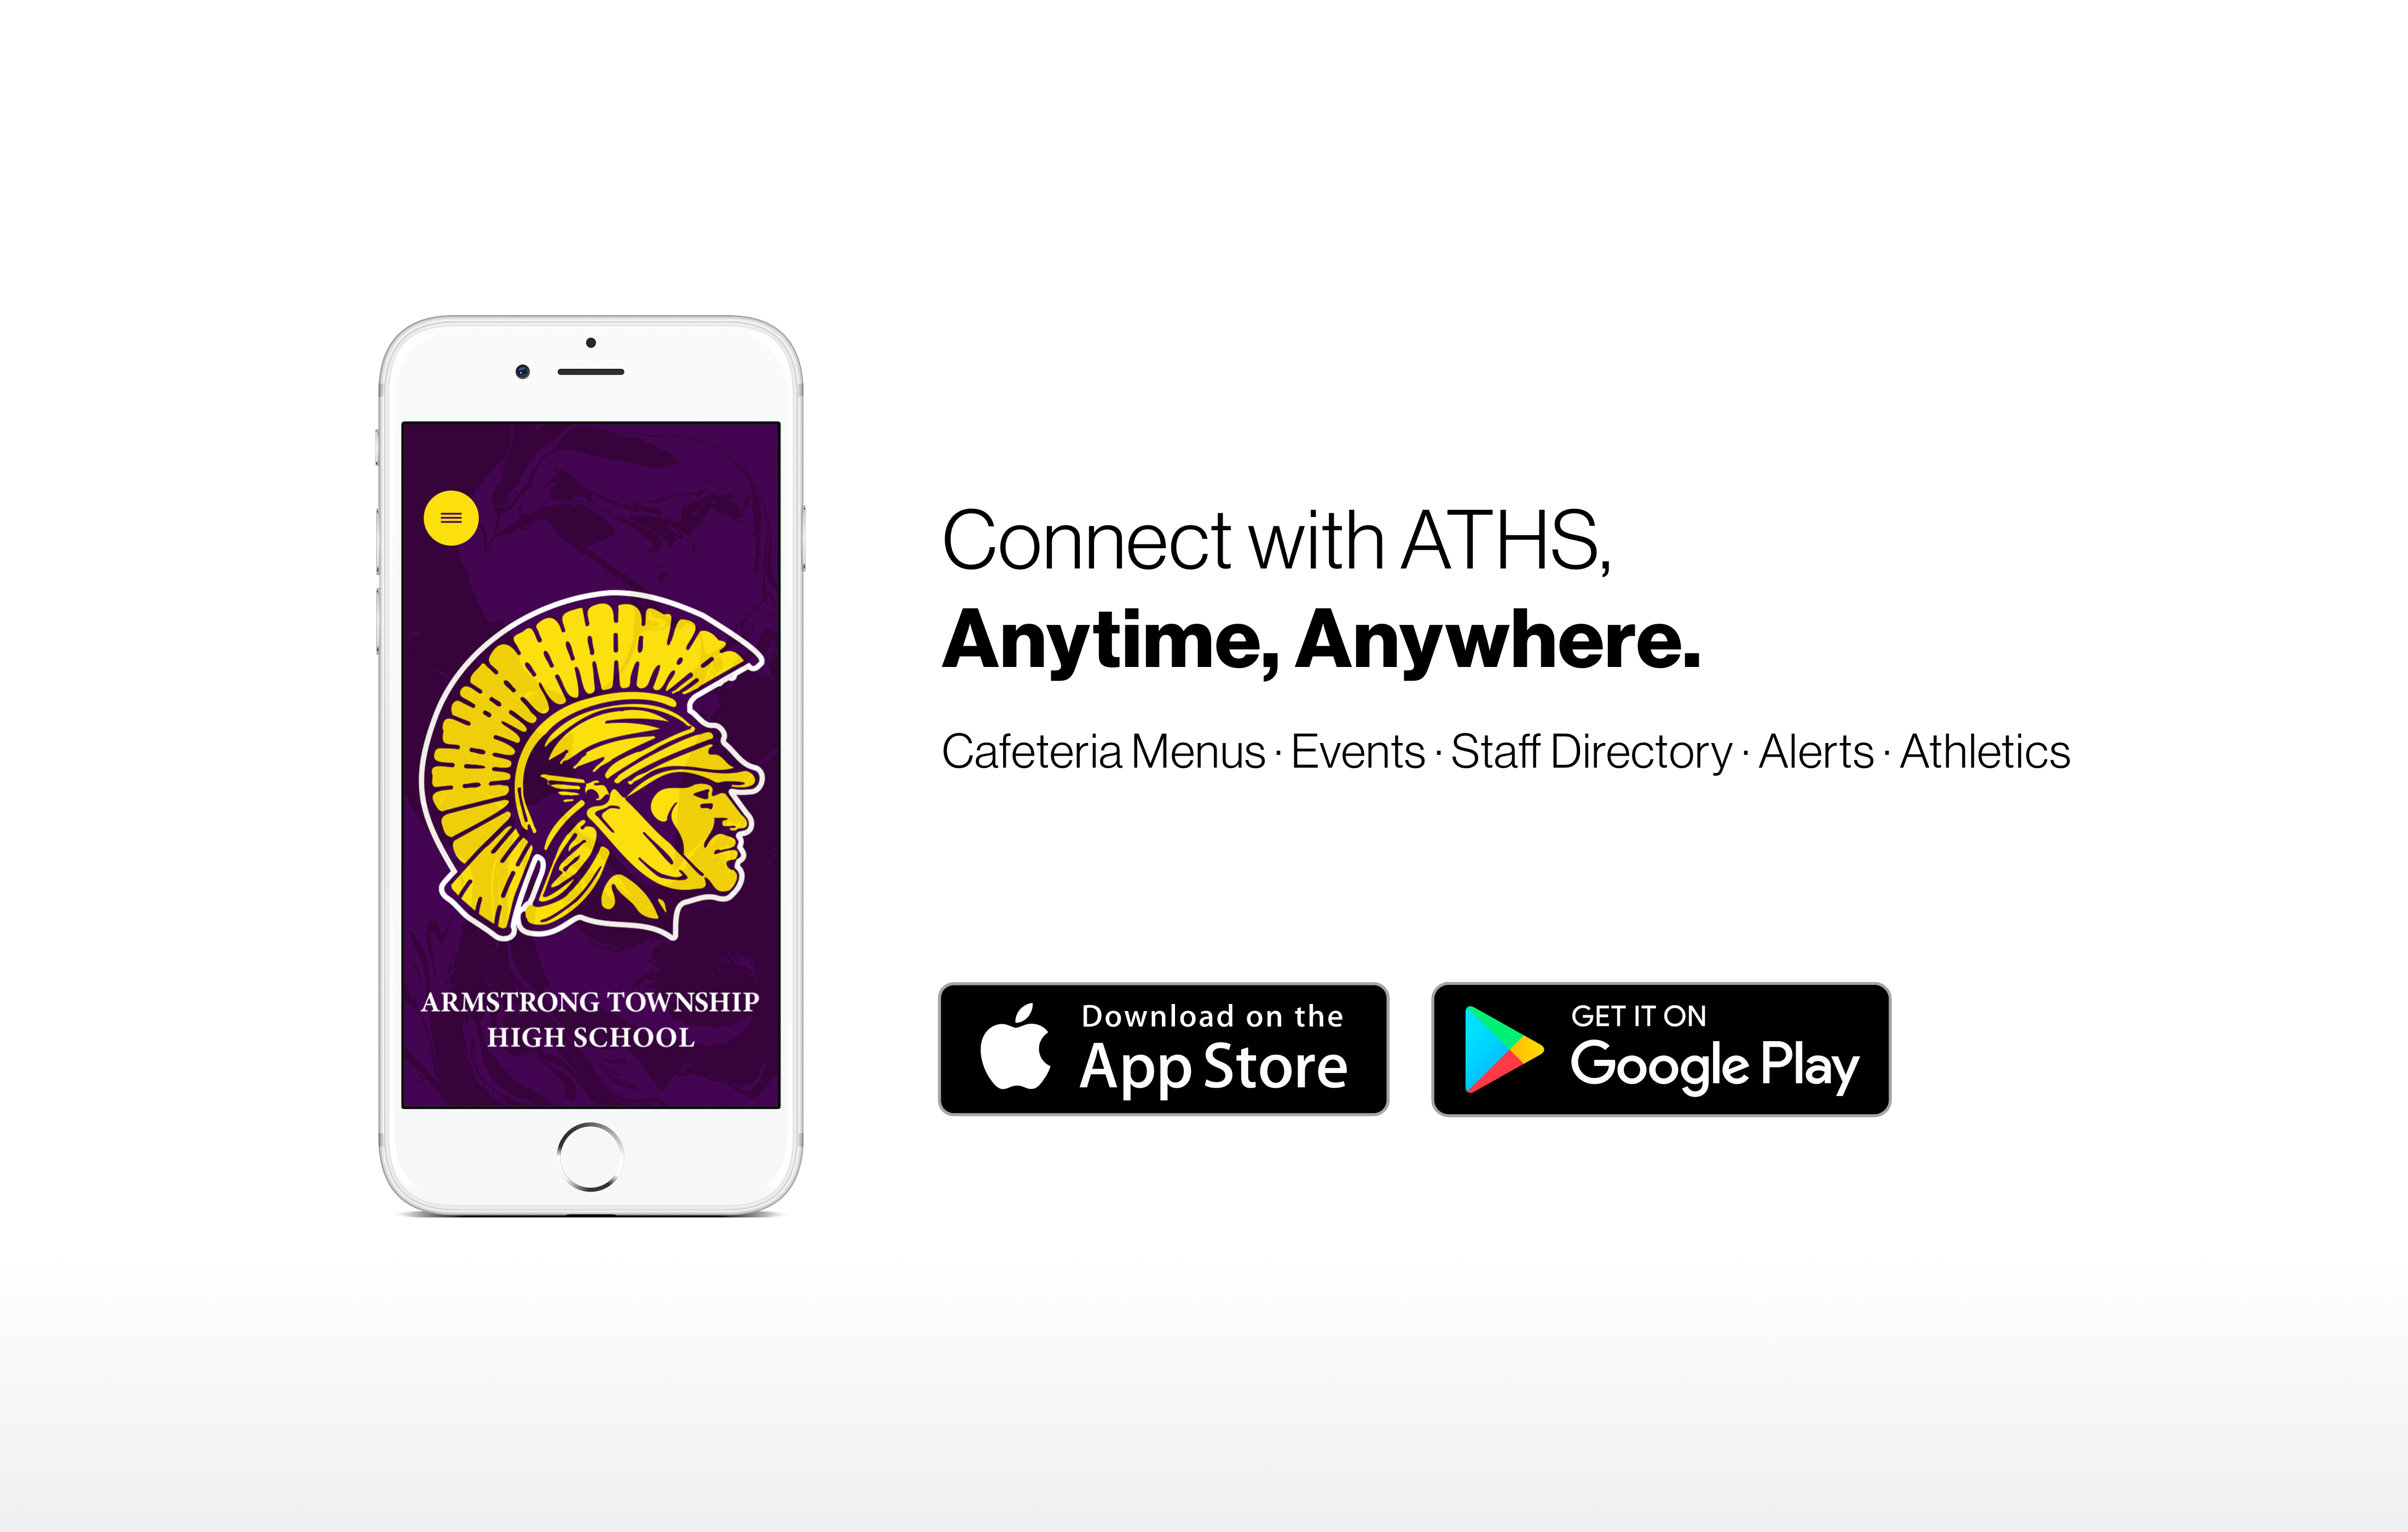 Connect with ATHS, anytime, anywhere